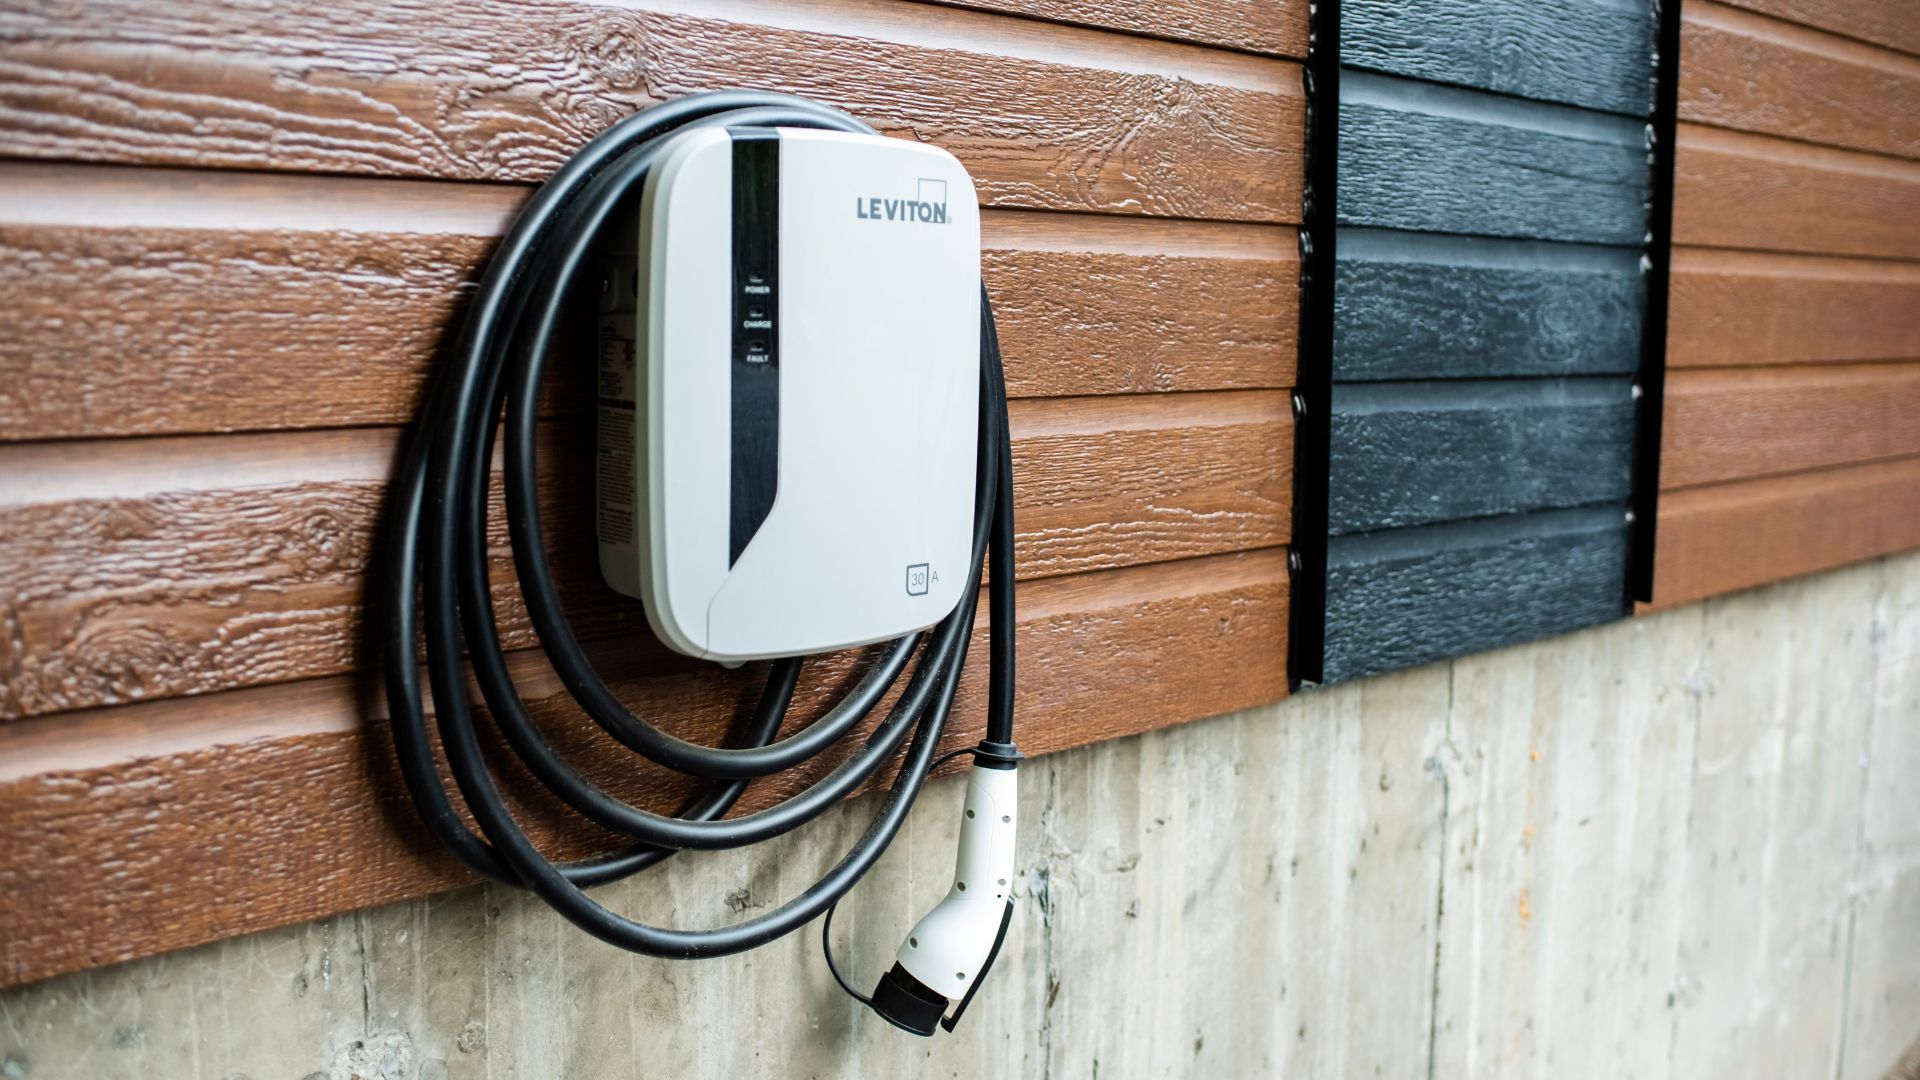 Essential Components of an EV Charger Explained